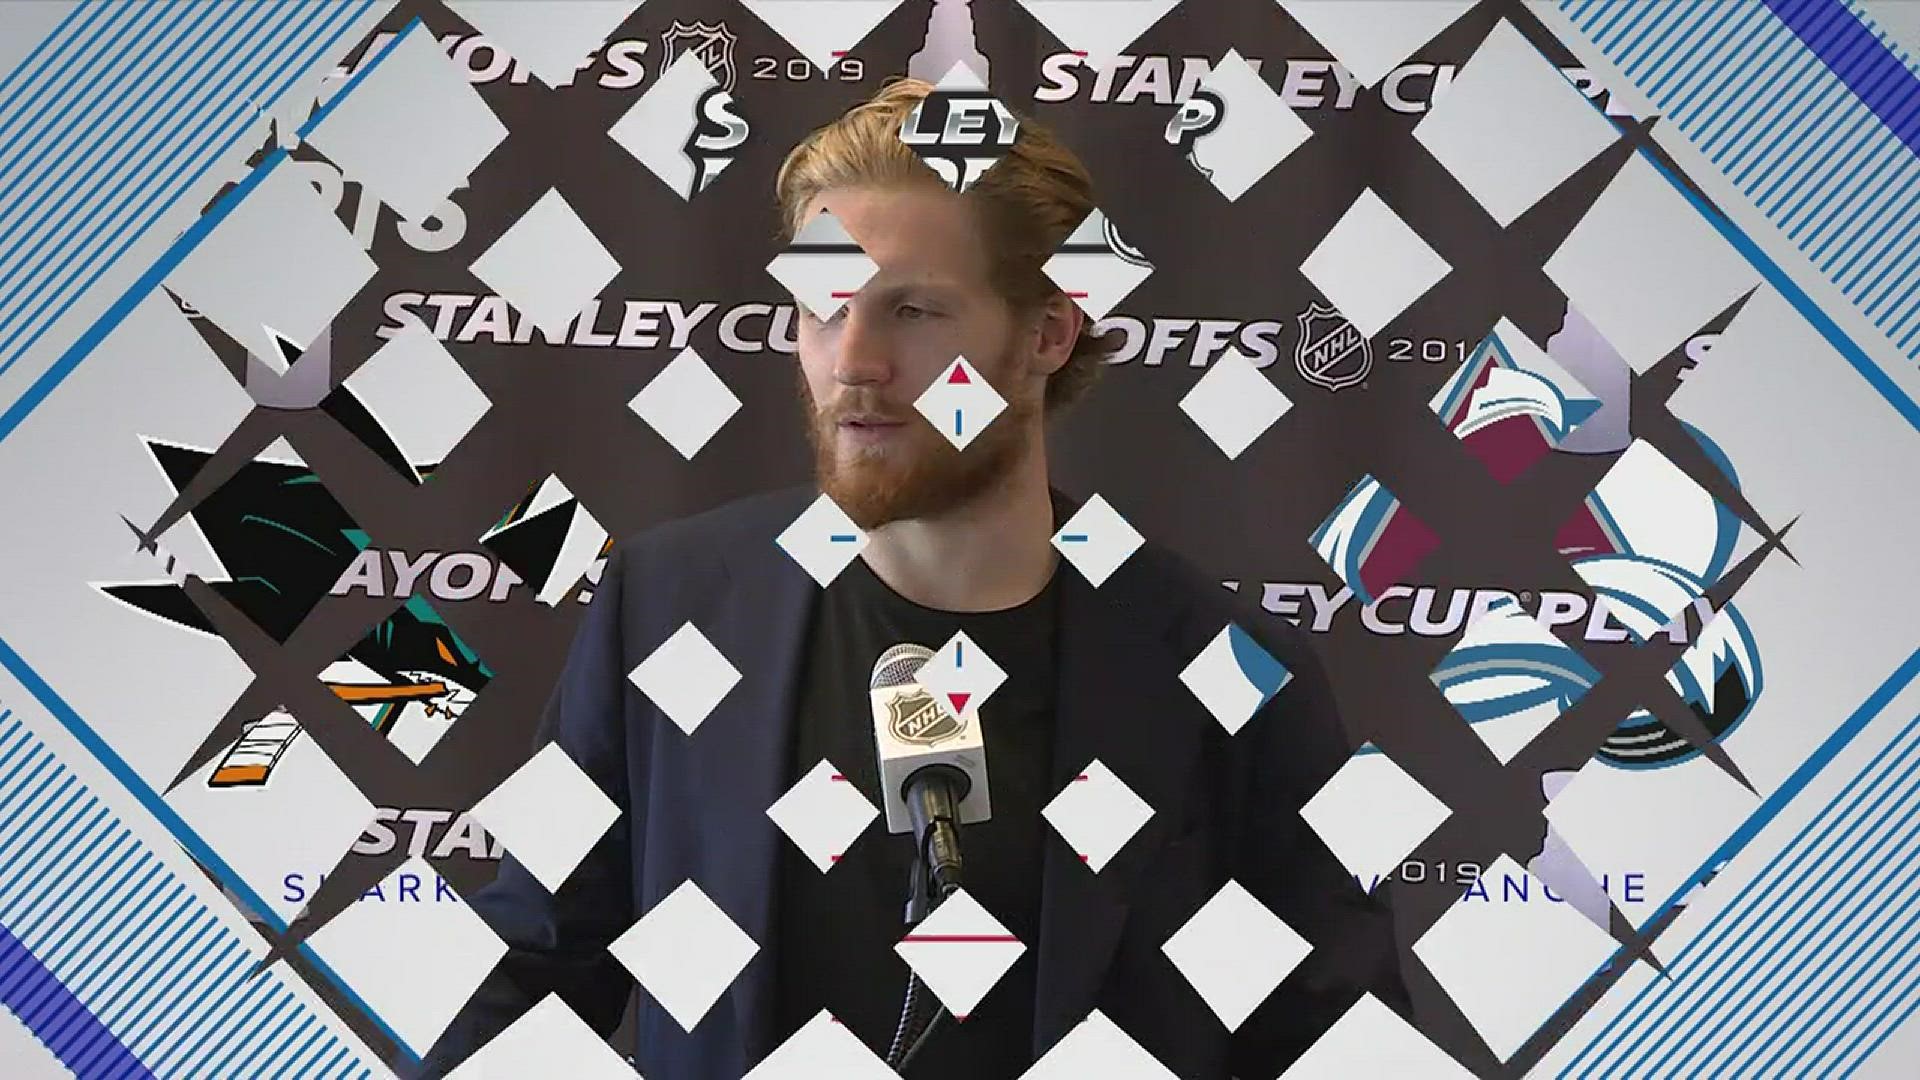 Colorado Avalanche captain Gabriel Landeskog says they've been counted out all season, but they will battle back like they have to this point.